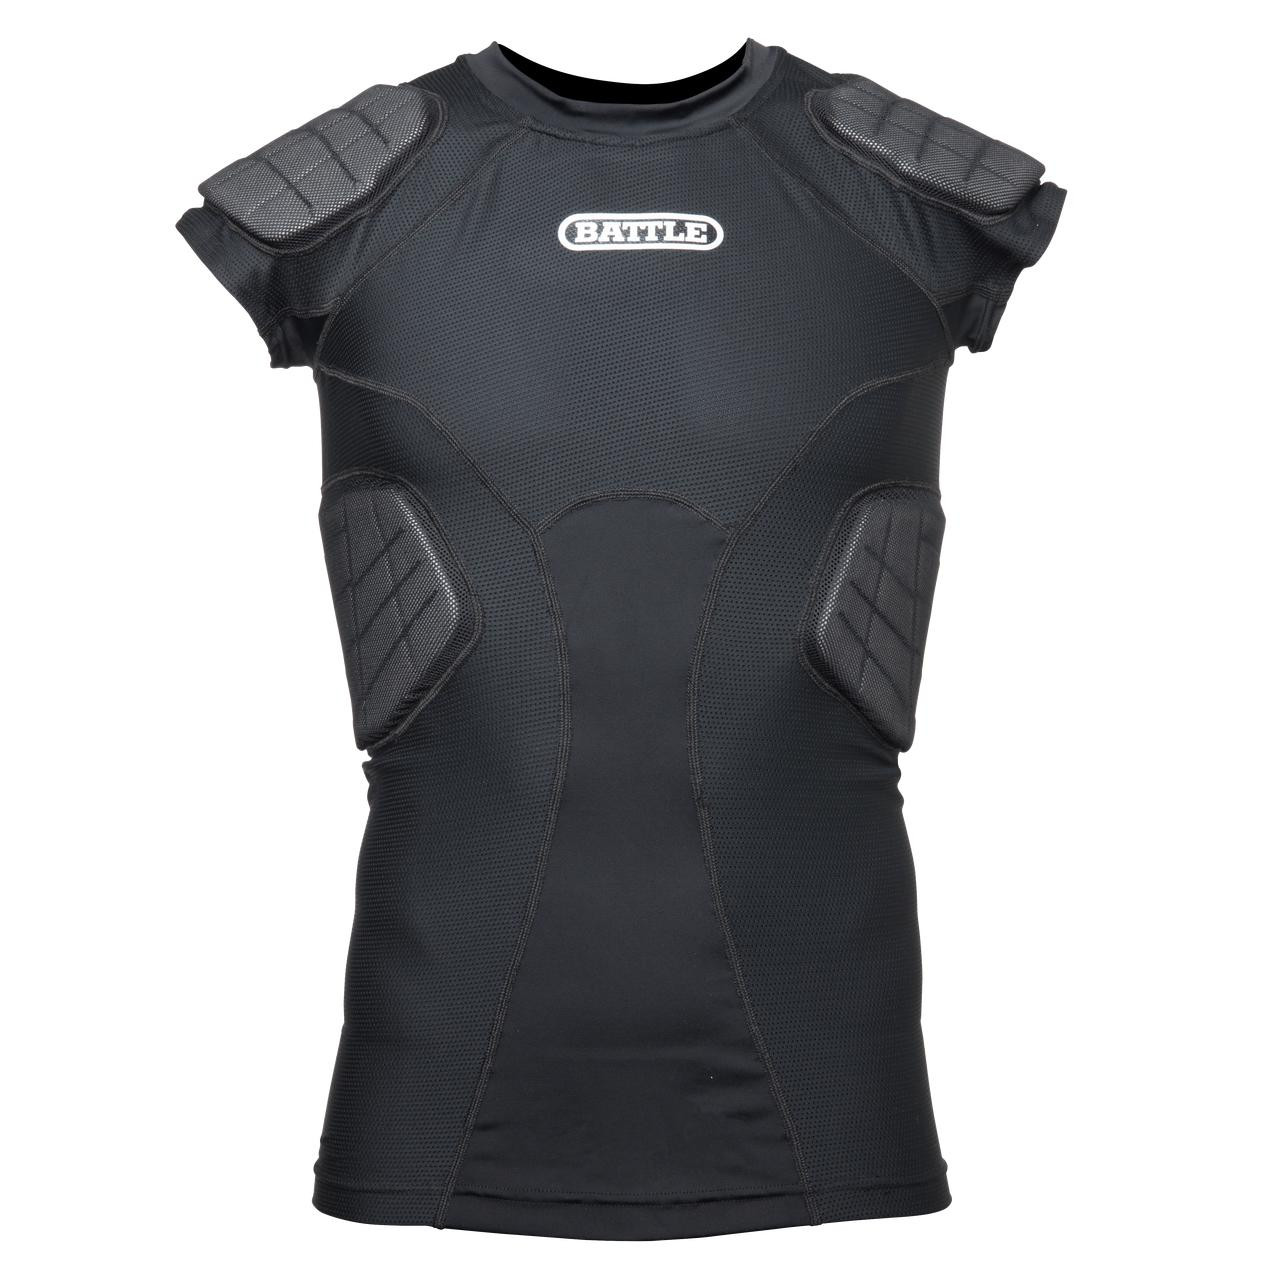 Integrated Padded Compression Top